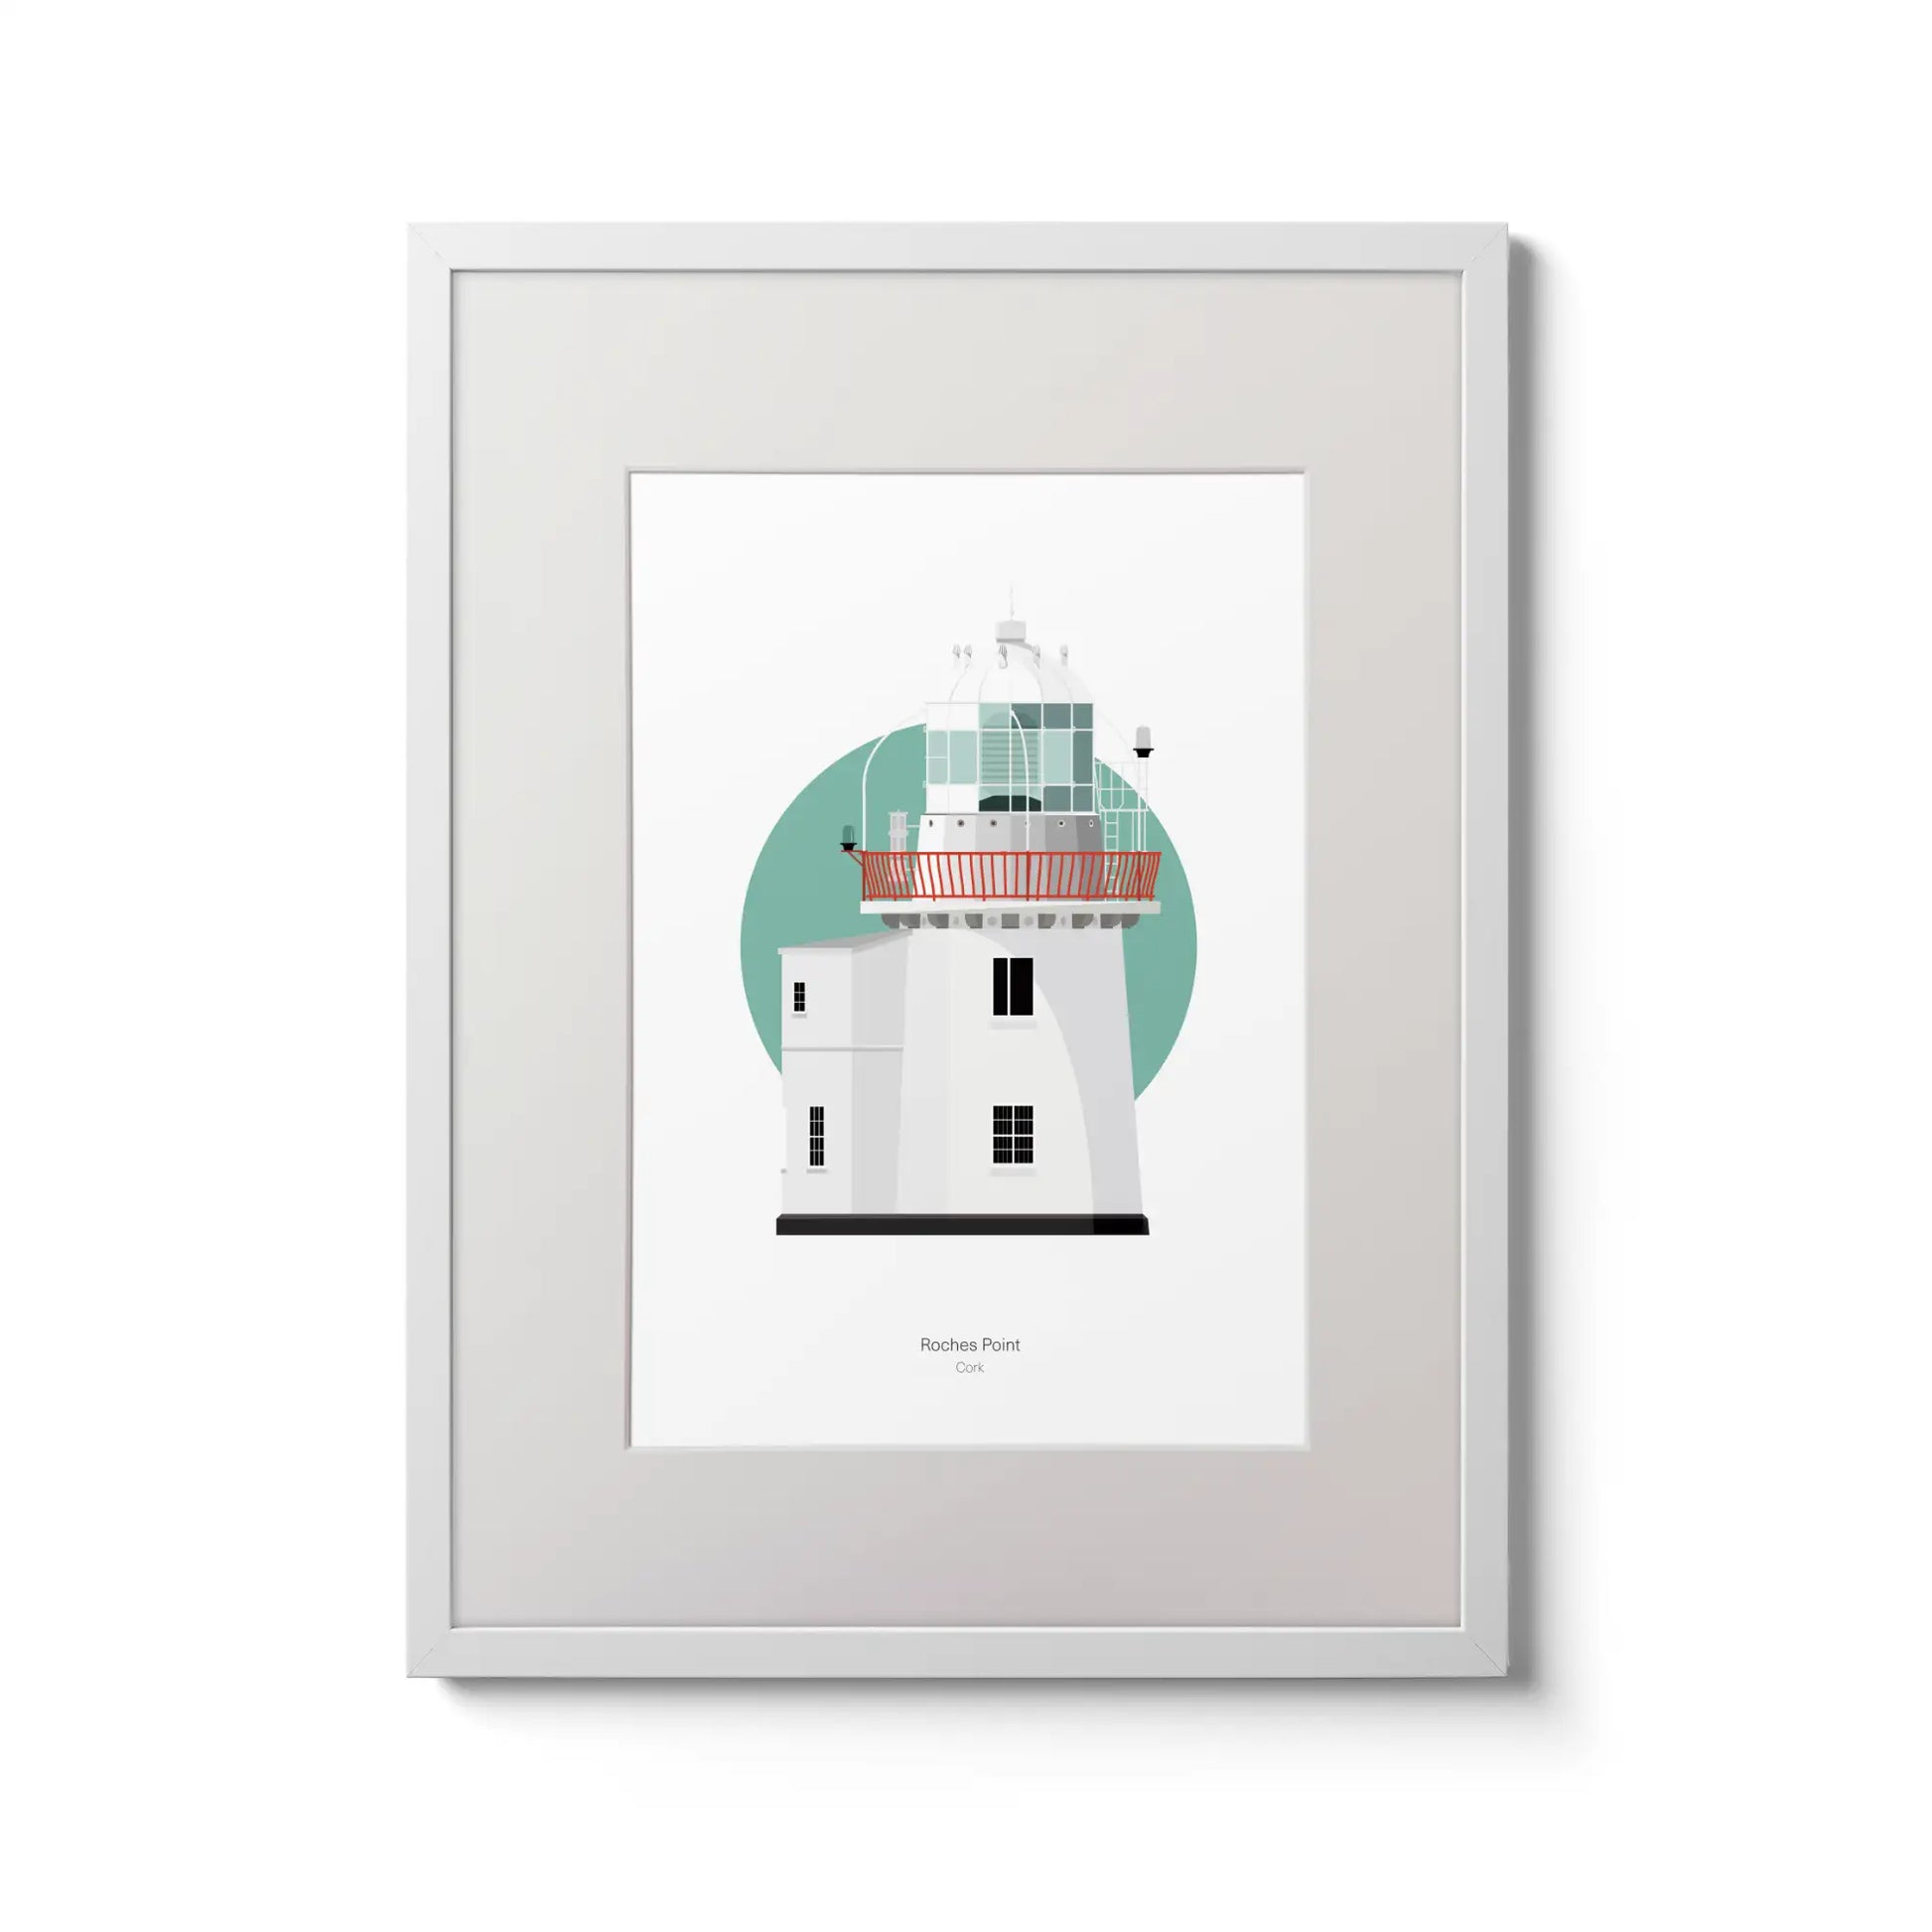 Illustration of Roches Point lighthouse on a white background inside light blue square,  in a white frame measuring 30x40cm.